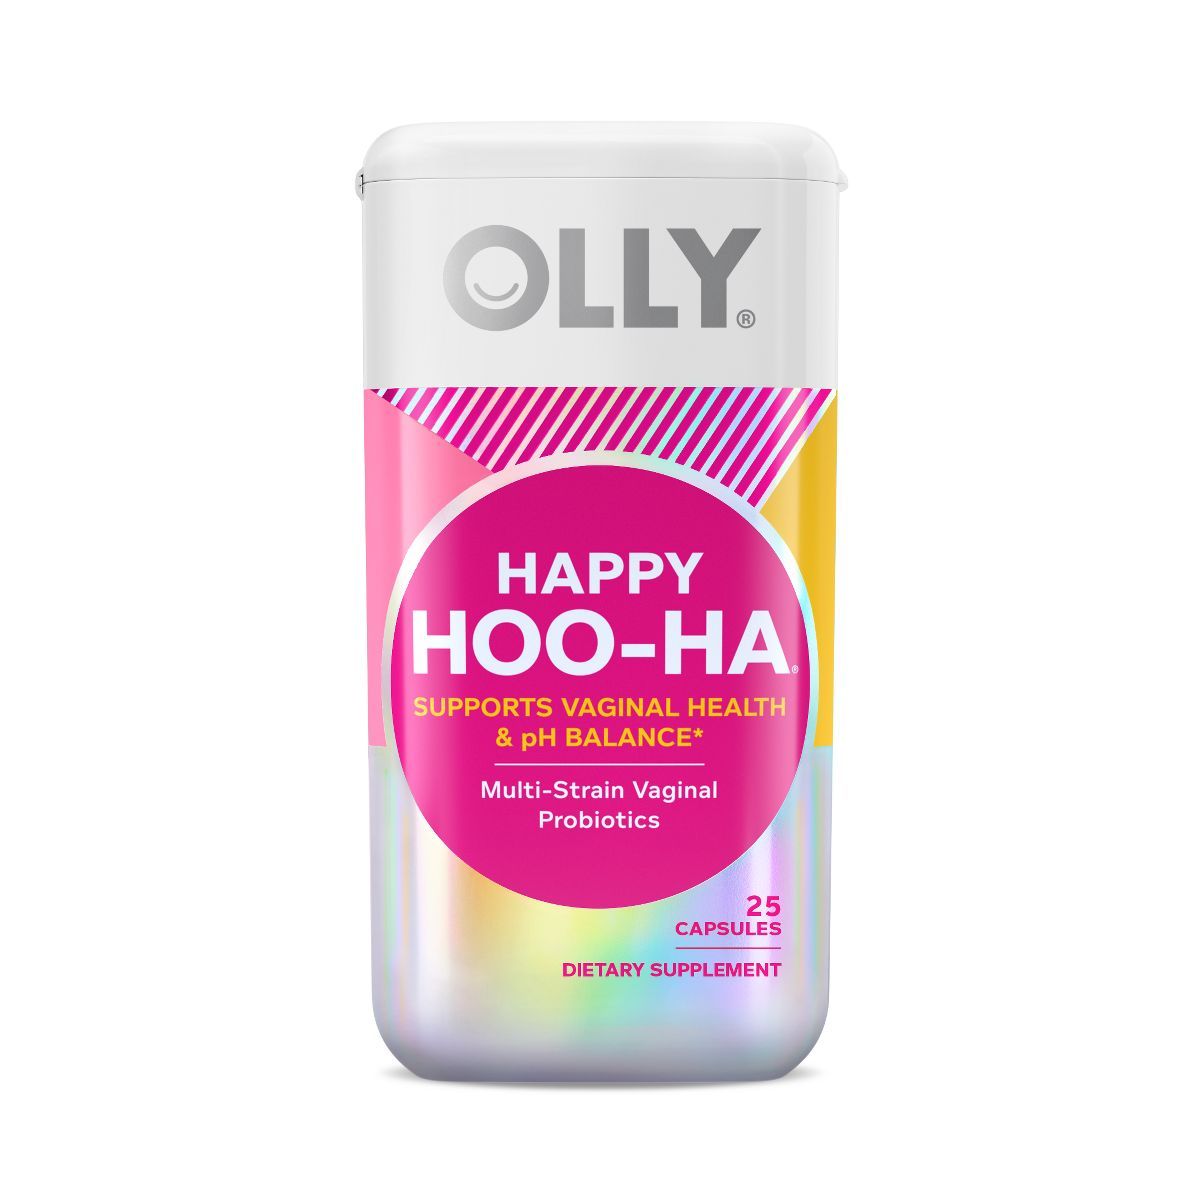 OLLY Happy Hoo-Ha Probiotic Capsules for Women Supports, Vaginal Health and pH Balance - 25ct | Target